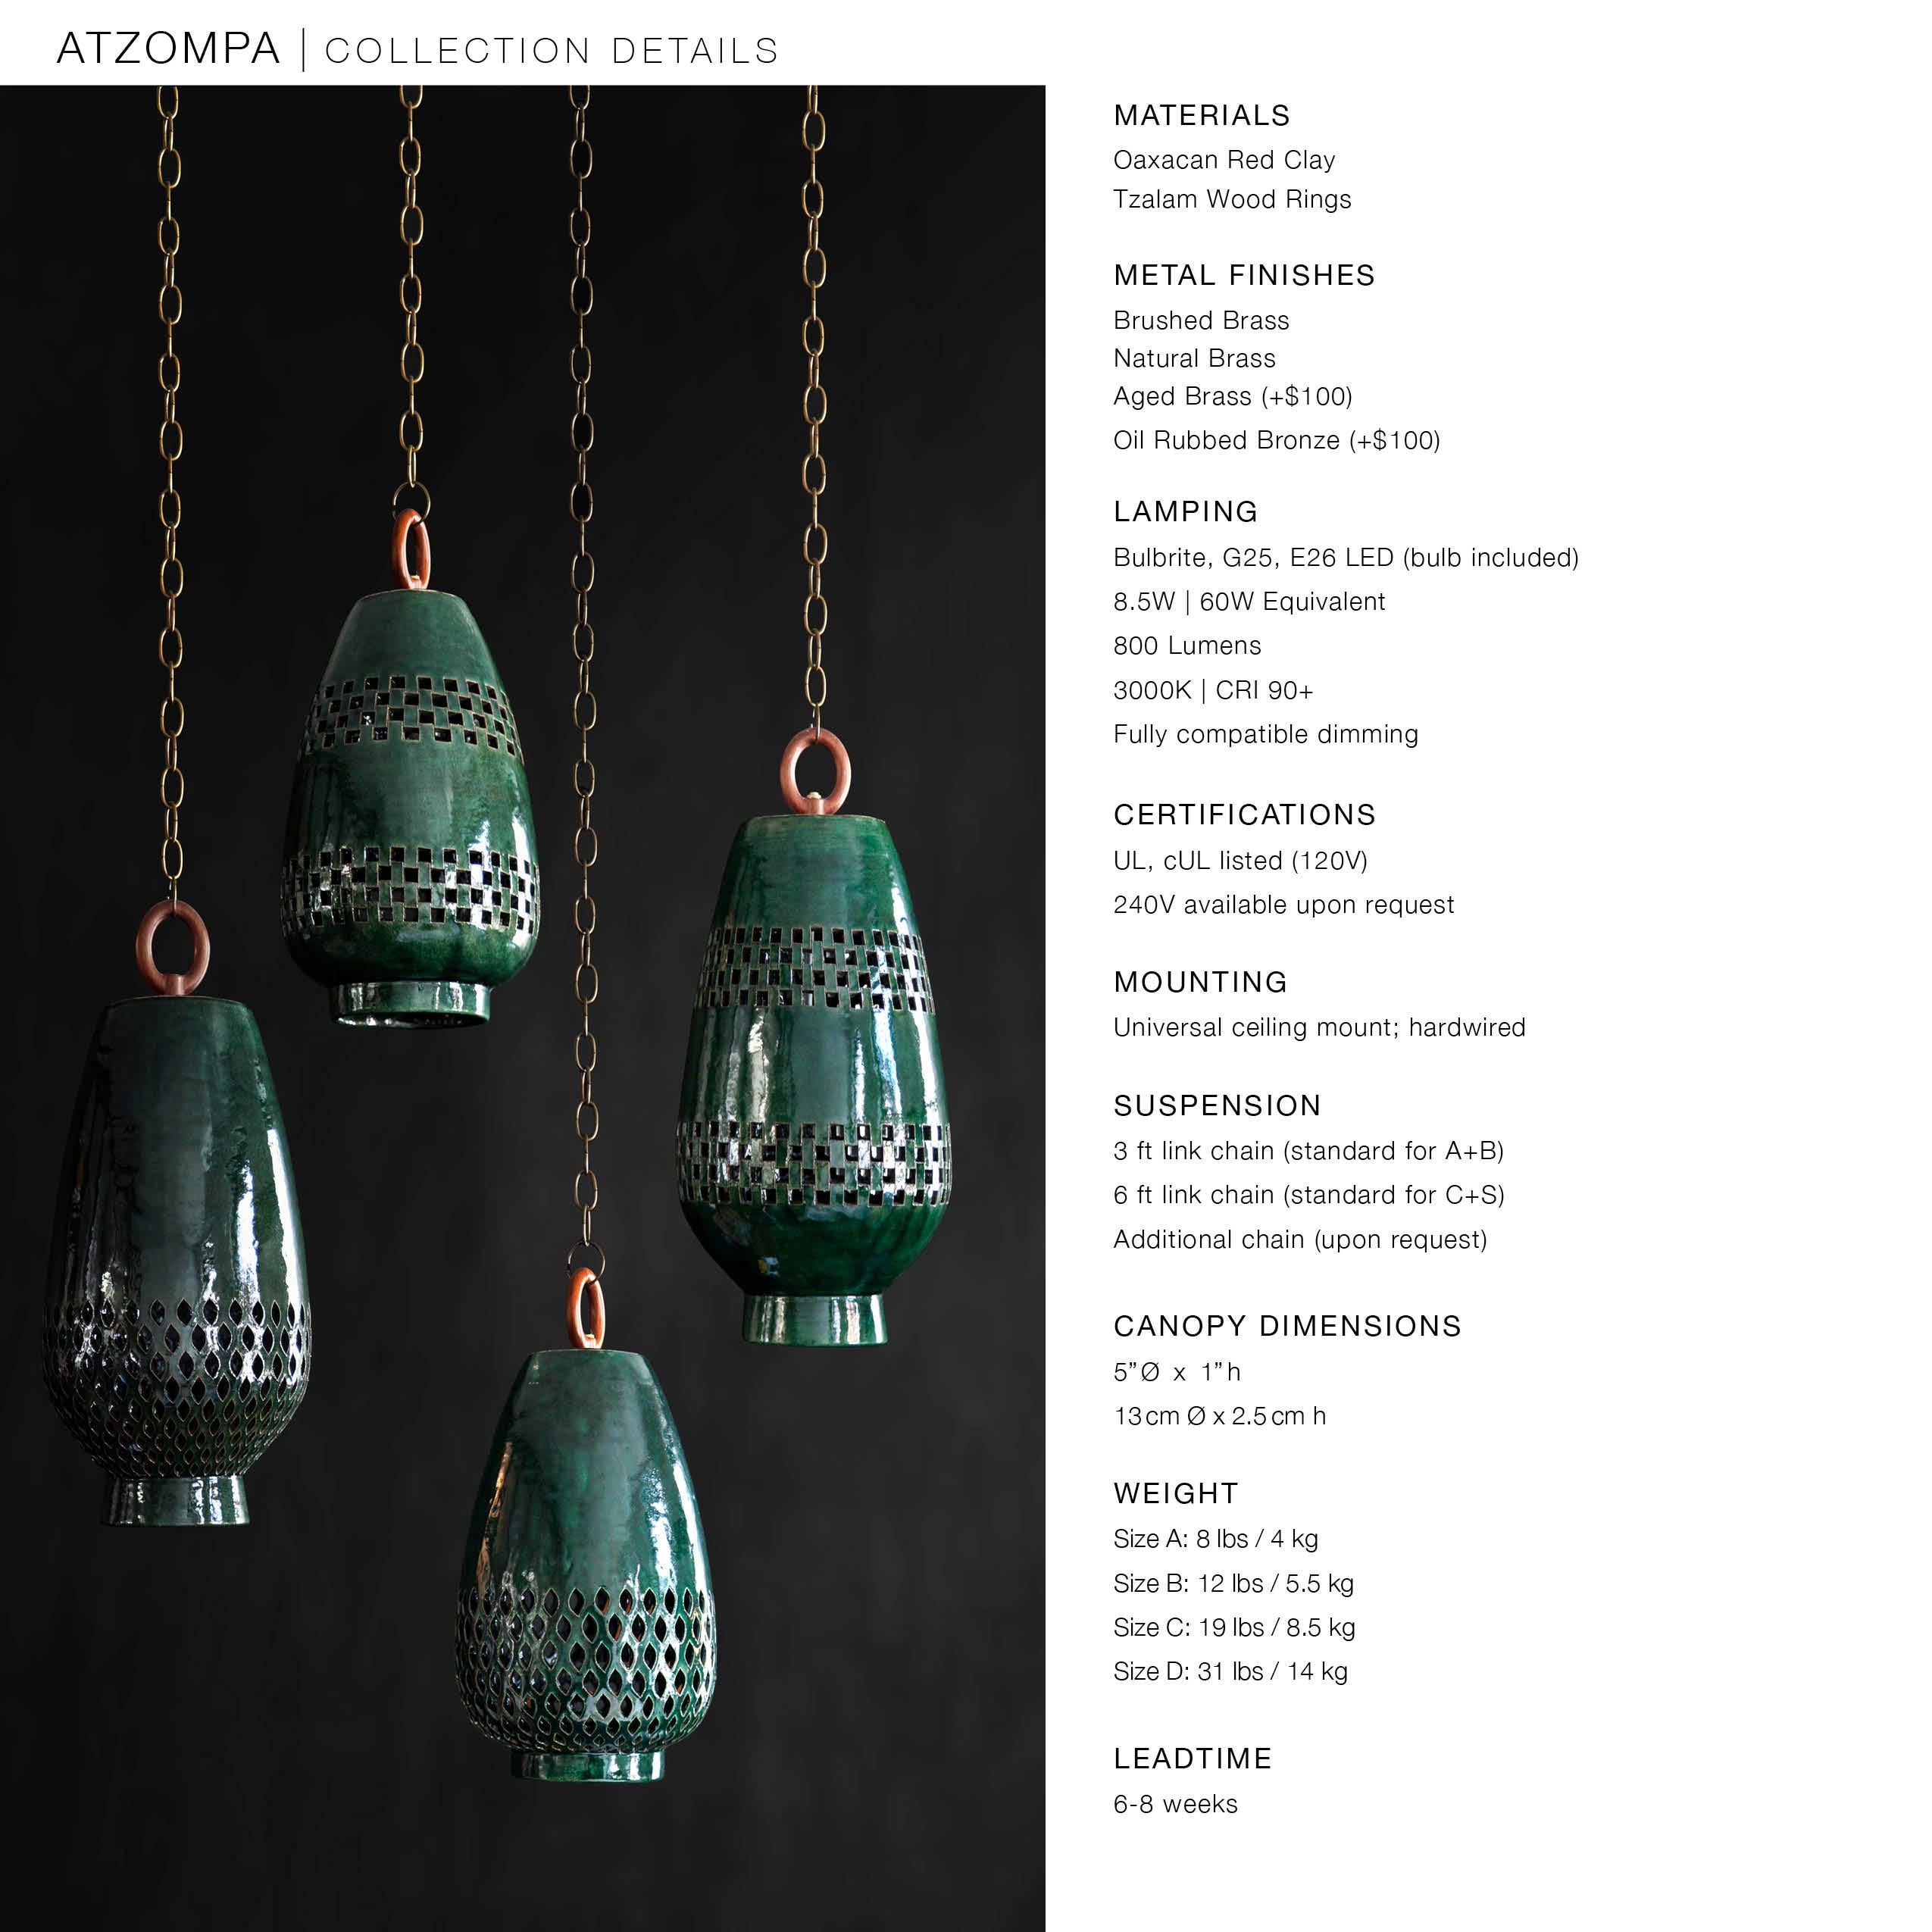 Emerald Ceramic Pendant Light XL, Aged Brass, Diamantes Atzompa Collection  In New Condition For Sale In New York, NY